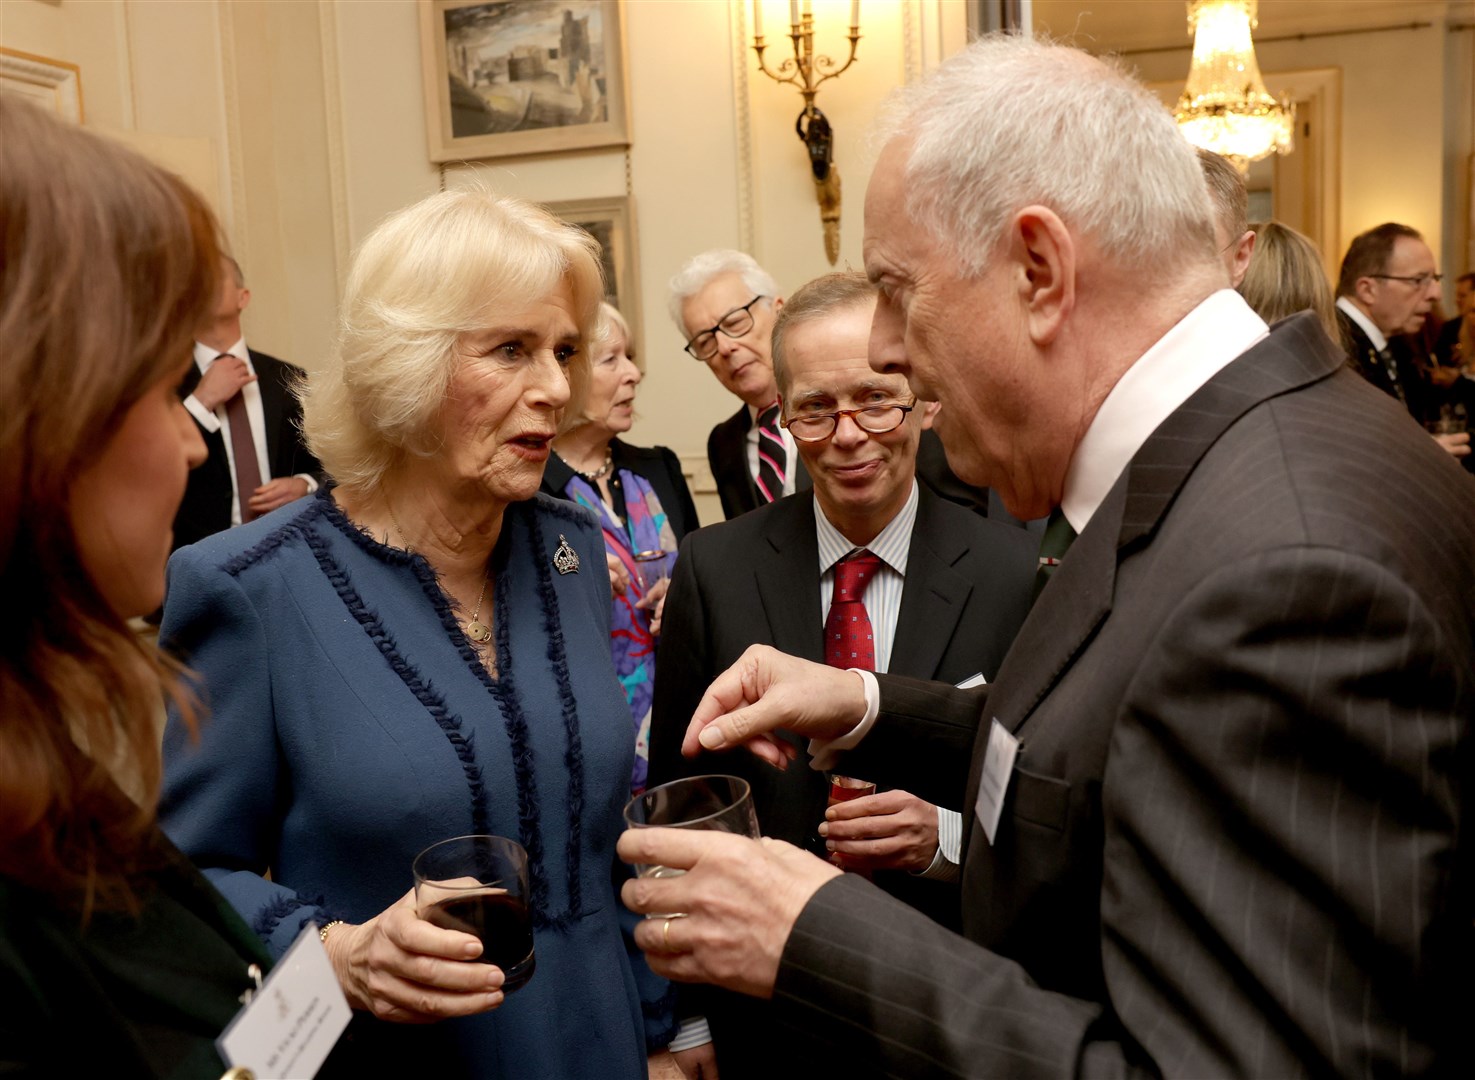 The Queen Consort meets Gyles Brandreth at she launched her The Queen’s Reading Room charity (Chris Jackson/PA)